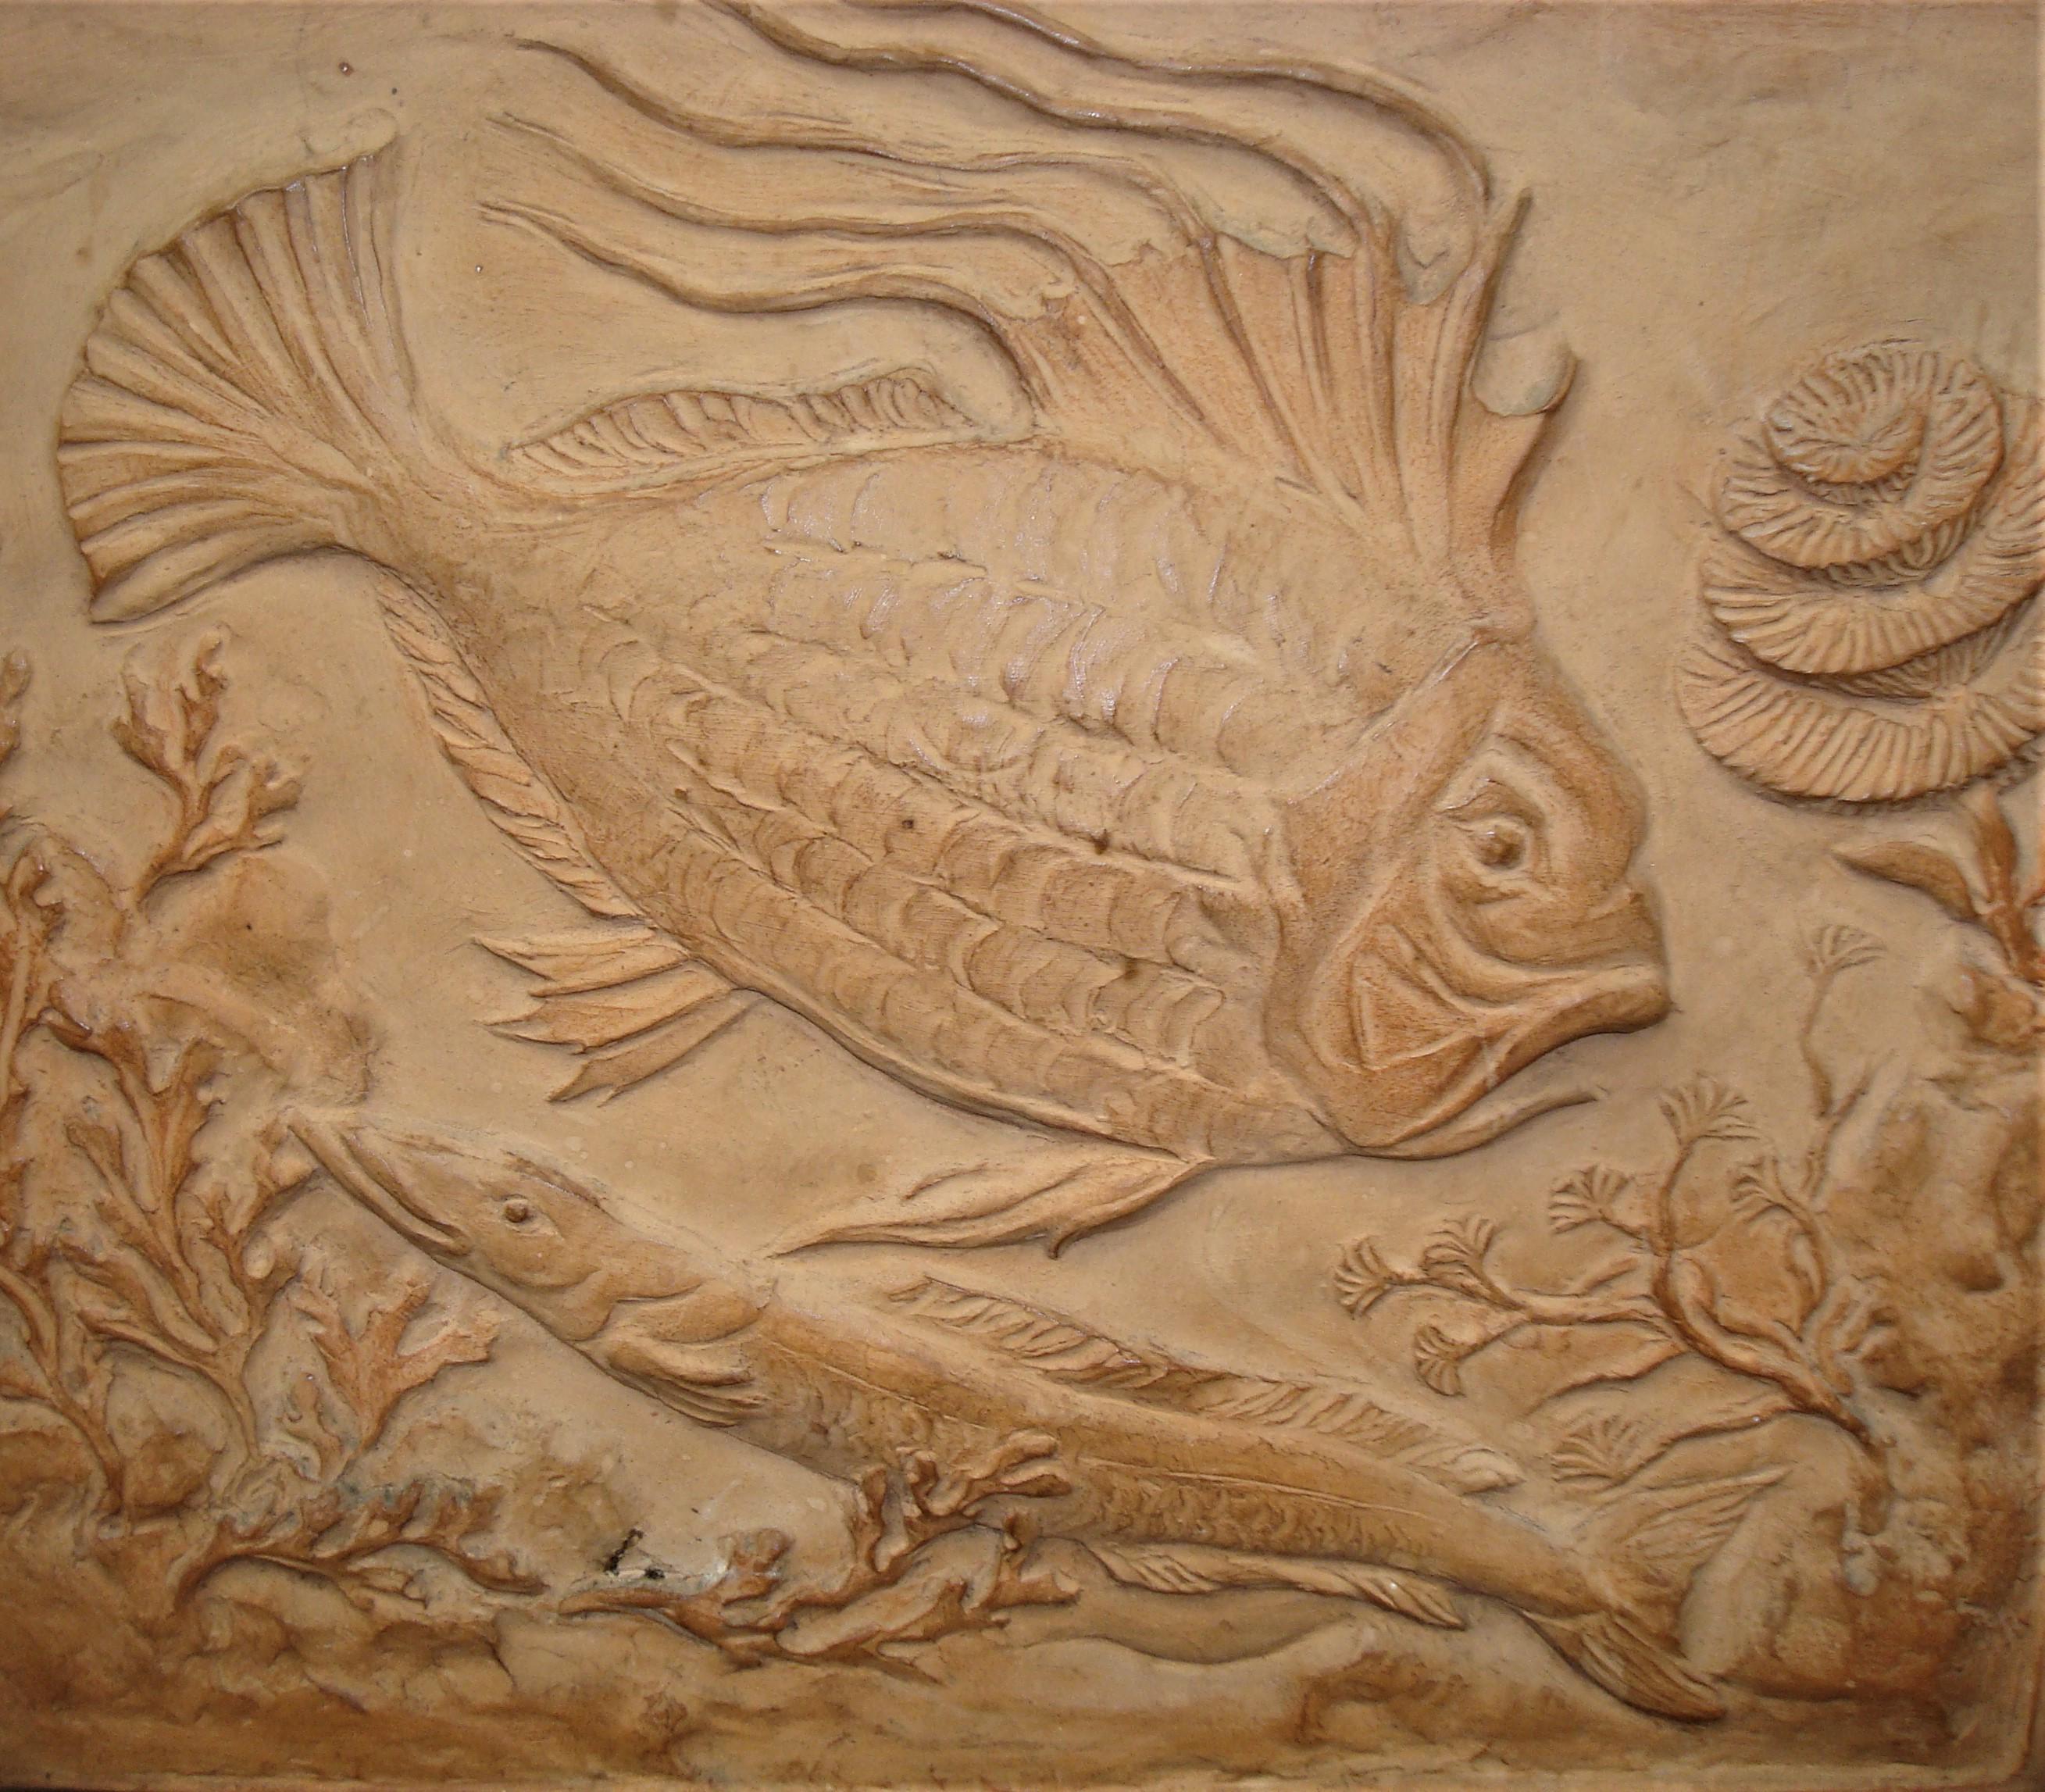 19th Century Pair of Terracotta Plaques of Sculpted Fish In Good Condition For Sale In Moreton-in-Marsh, Gloucestershire